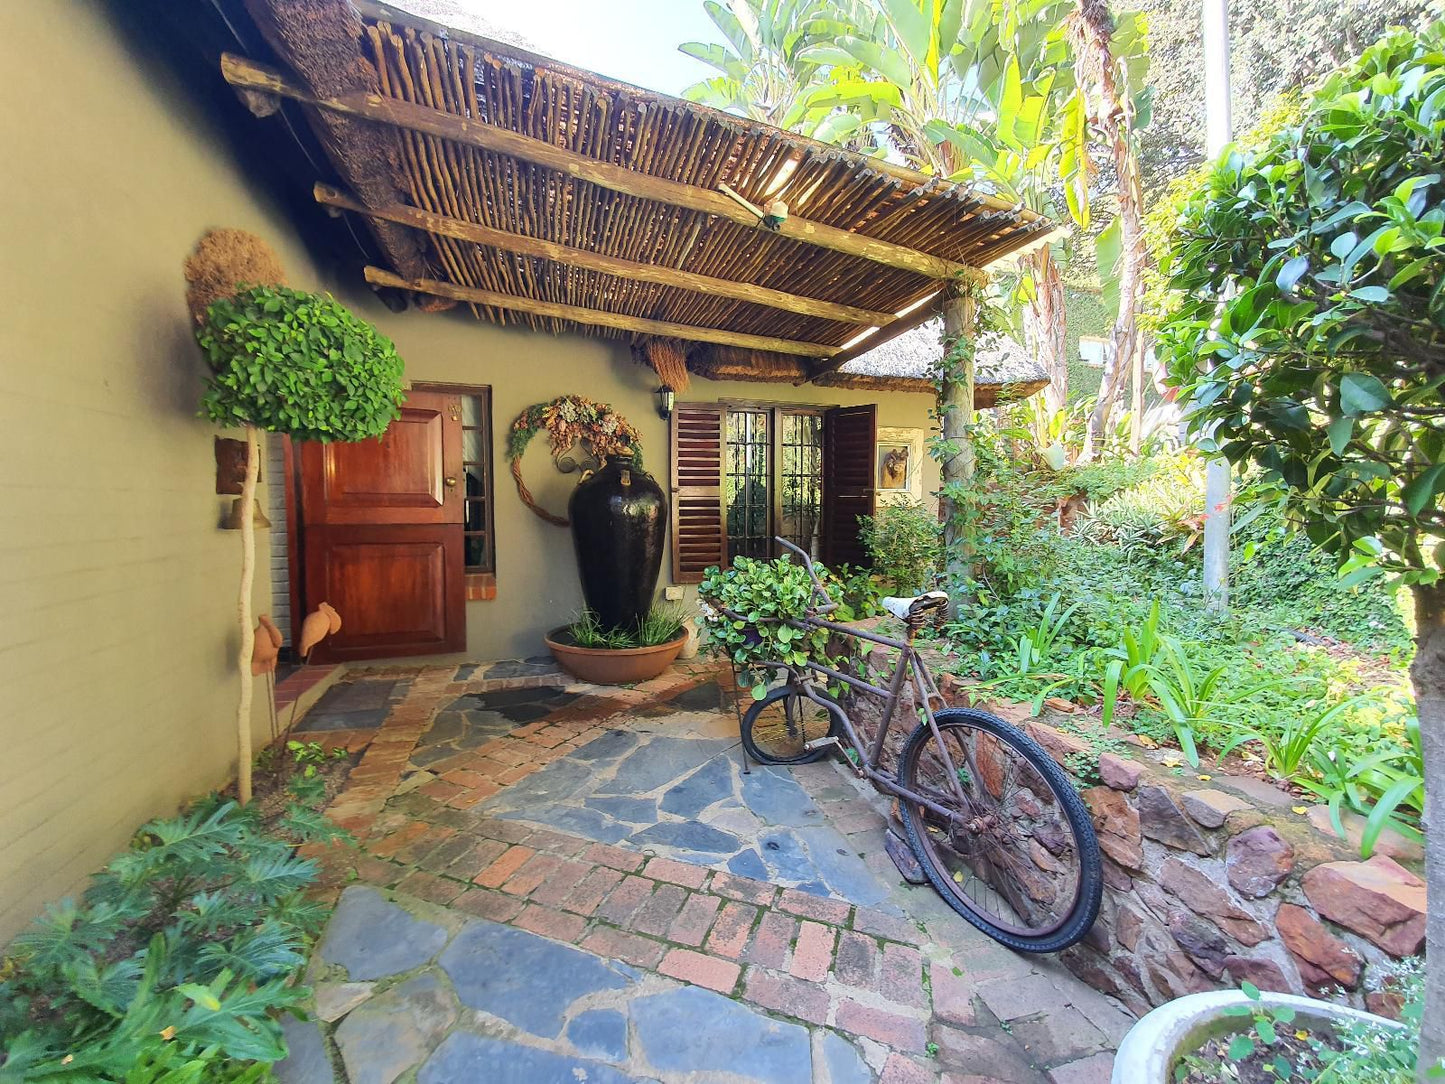 Waterhouse Guest Lodge Lawley Street Waterkloof Pretoria Tshwane Gauteng South Africa House, Building, Architecture, Palm Tree, Plant, Nature, Wood, Garden, Bicycle, Vehicle